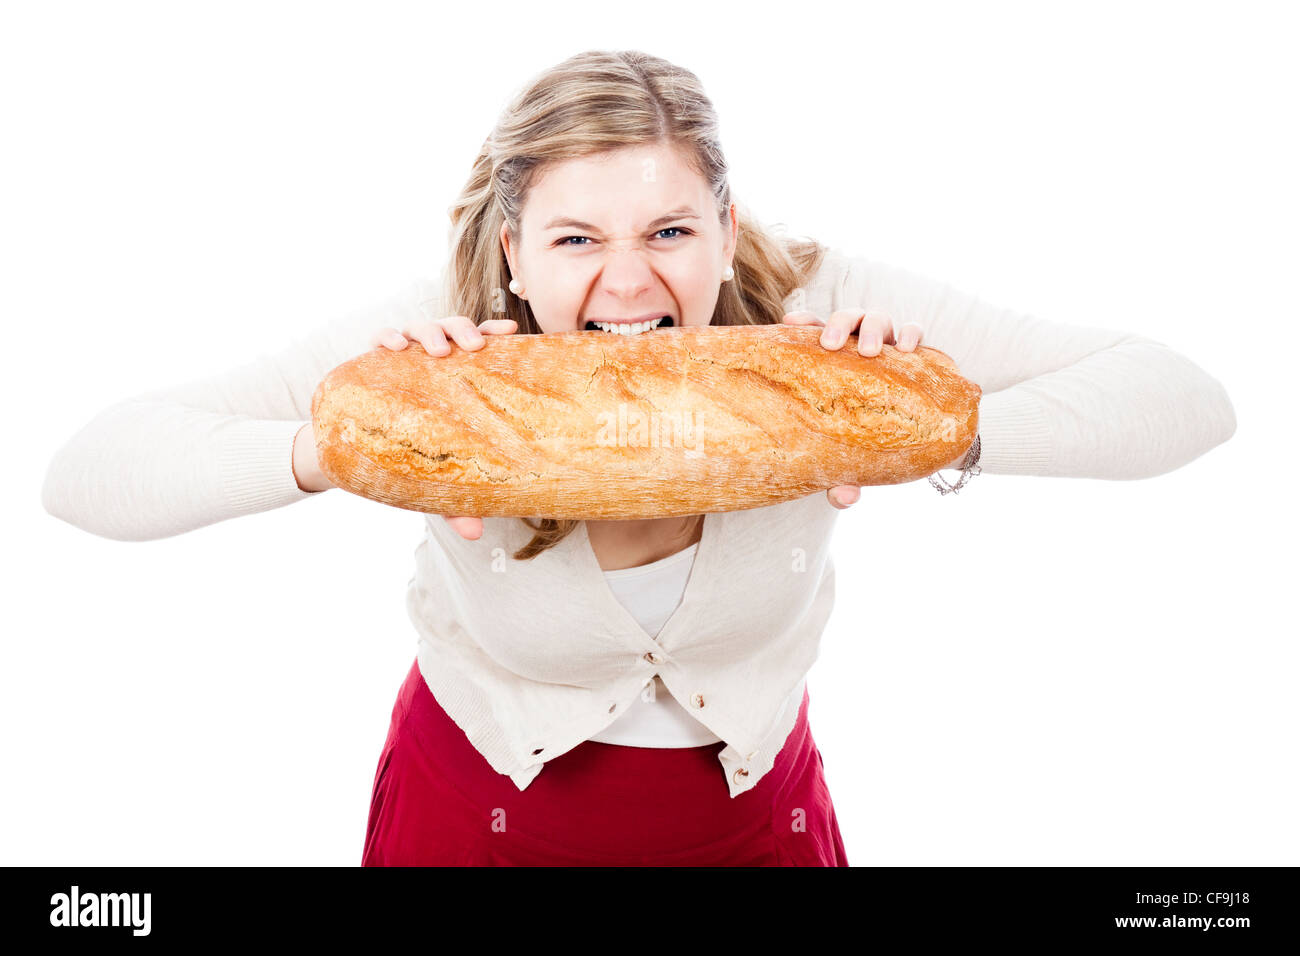 Hungry woman holding and biting loaf of bread, isolated on white background. Stock Photo